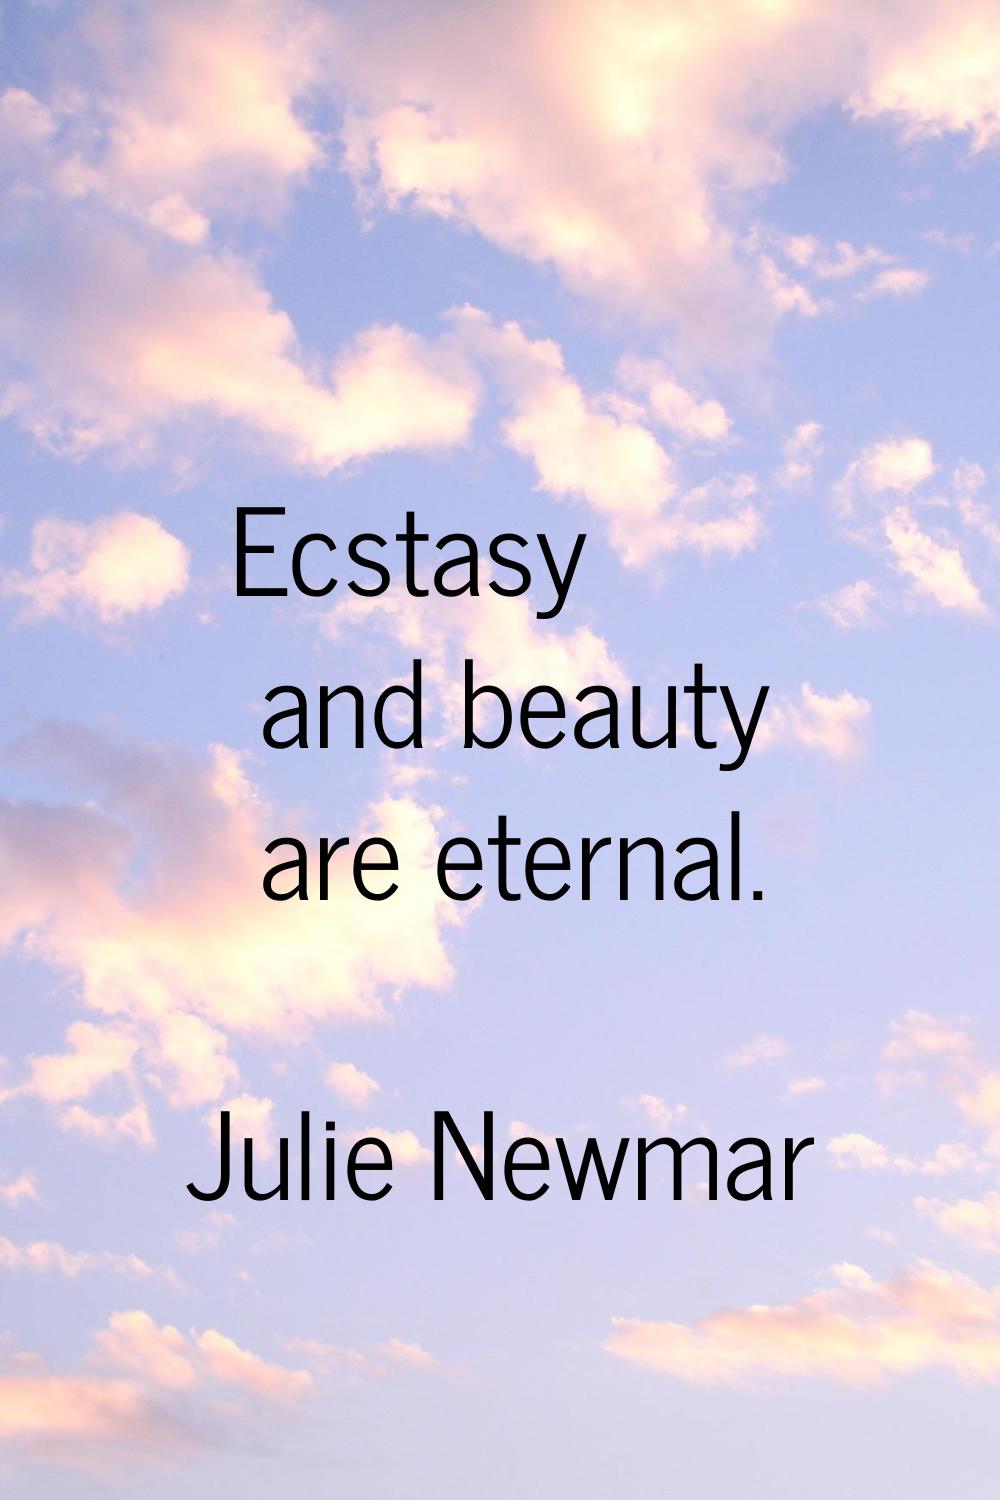 Ecstasy and beauty are eternal.